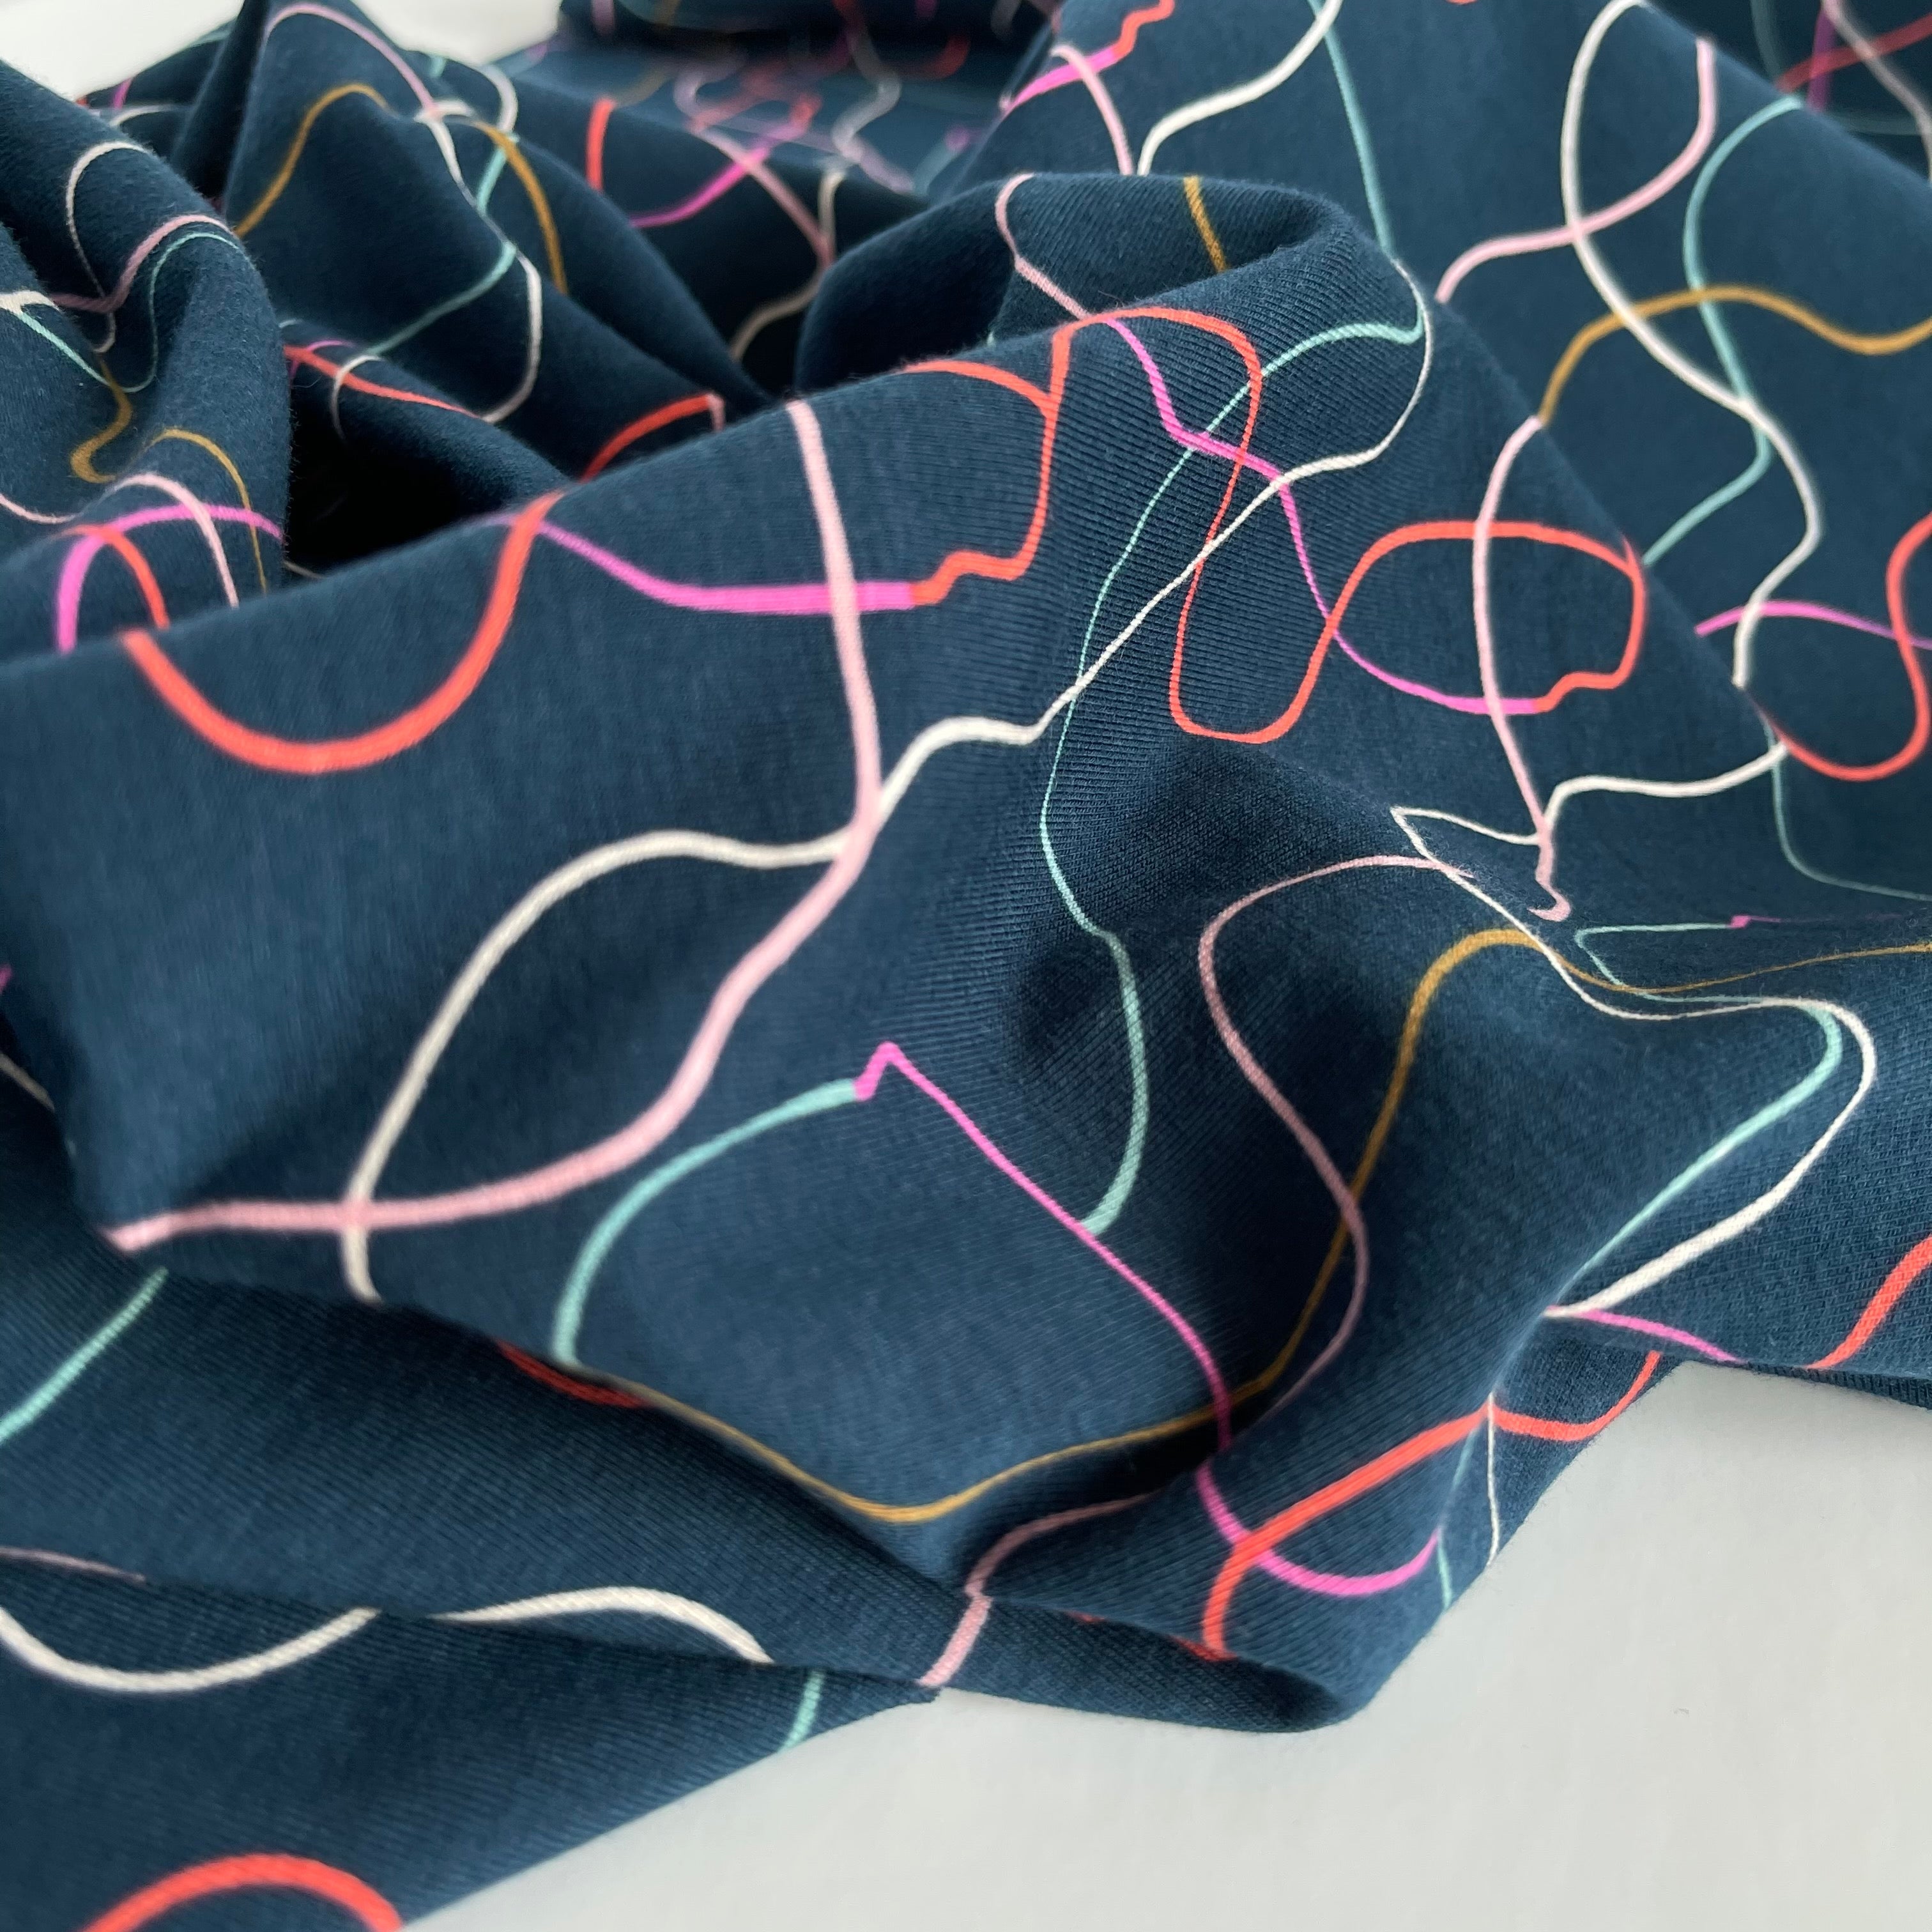 Soiree Between The Lines Cotton Jersey Fabric